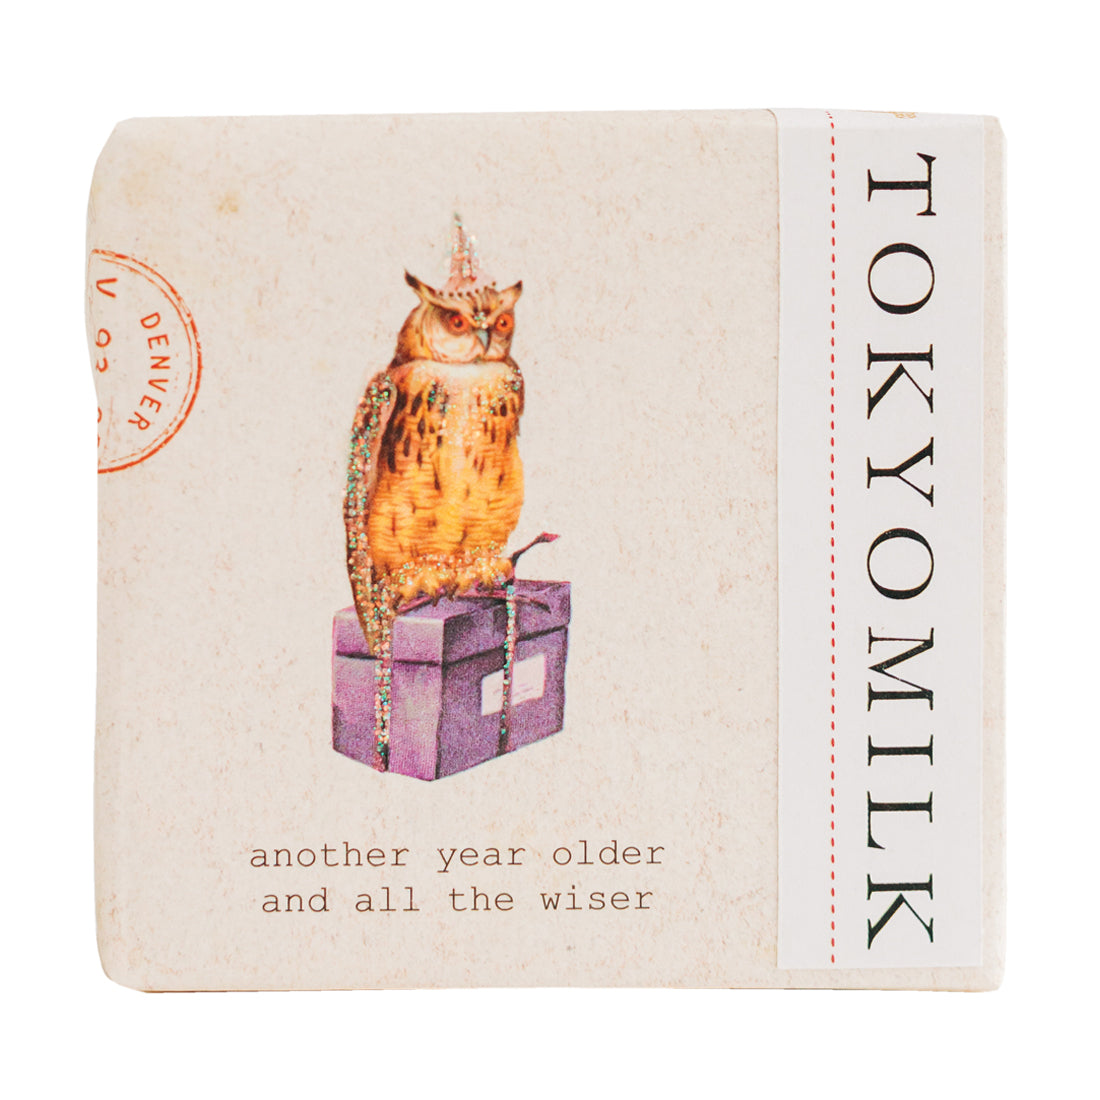 An illustrated greeting card depicting an owl perched on a stack of books with the words "another year older and all the wiser" and "TokyoMilk Finest Perfumed Soap - Another Year Older" printed on the
Margot Elena.